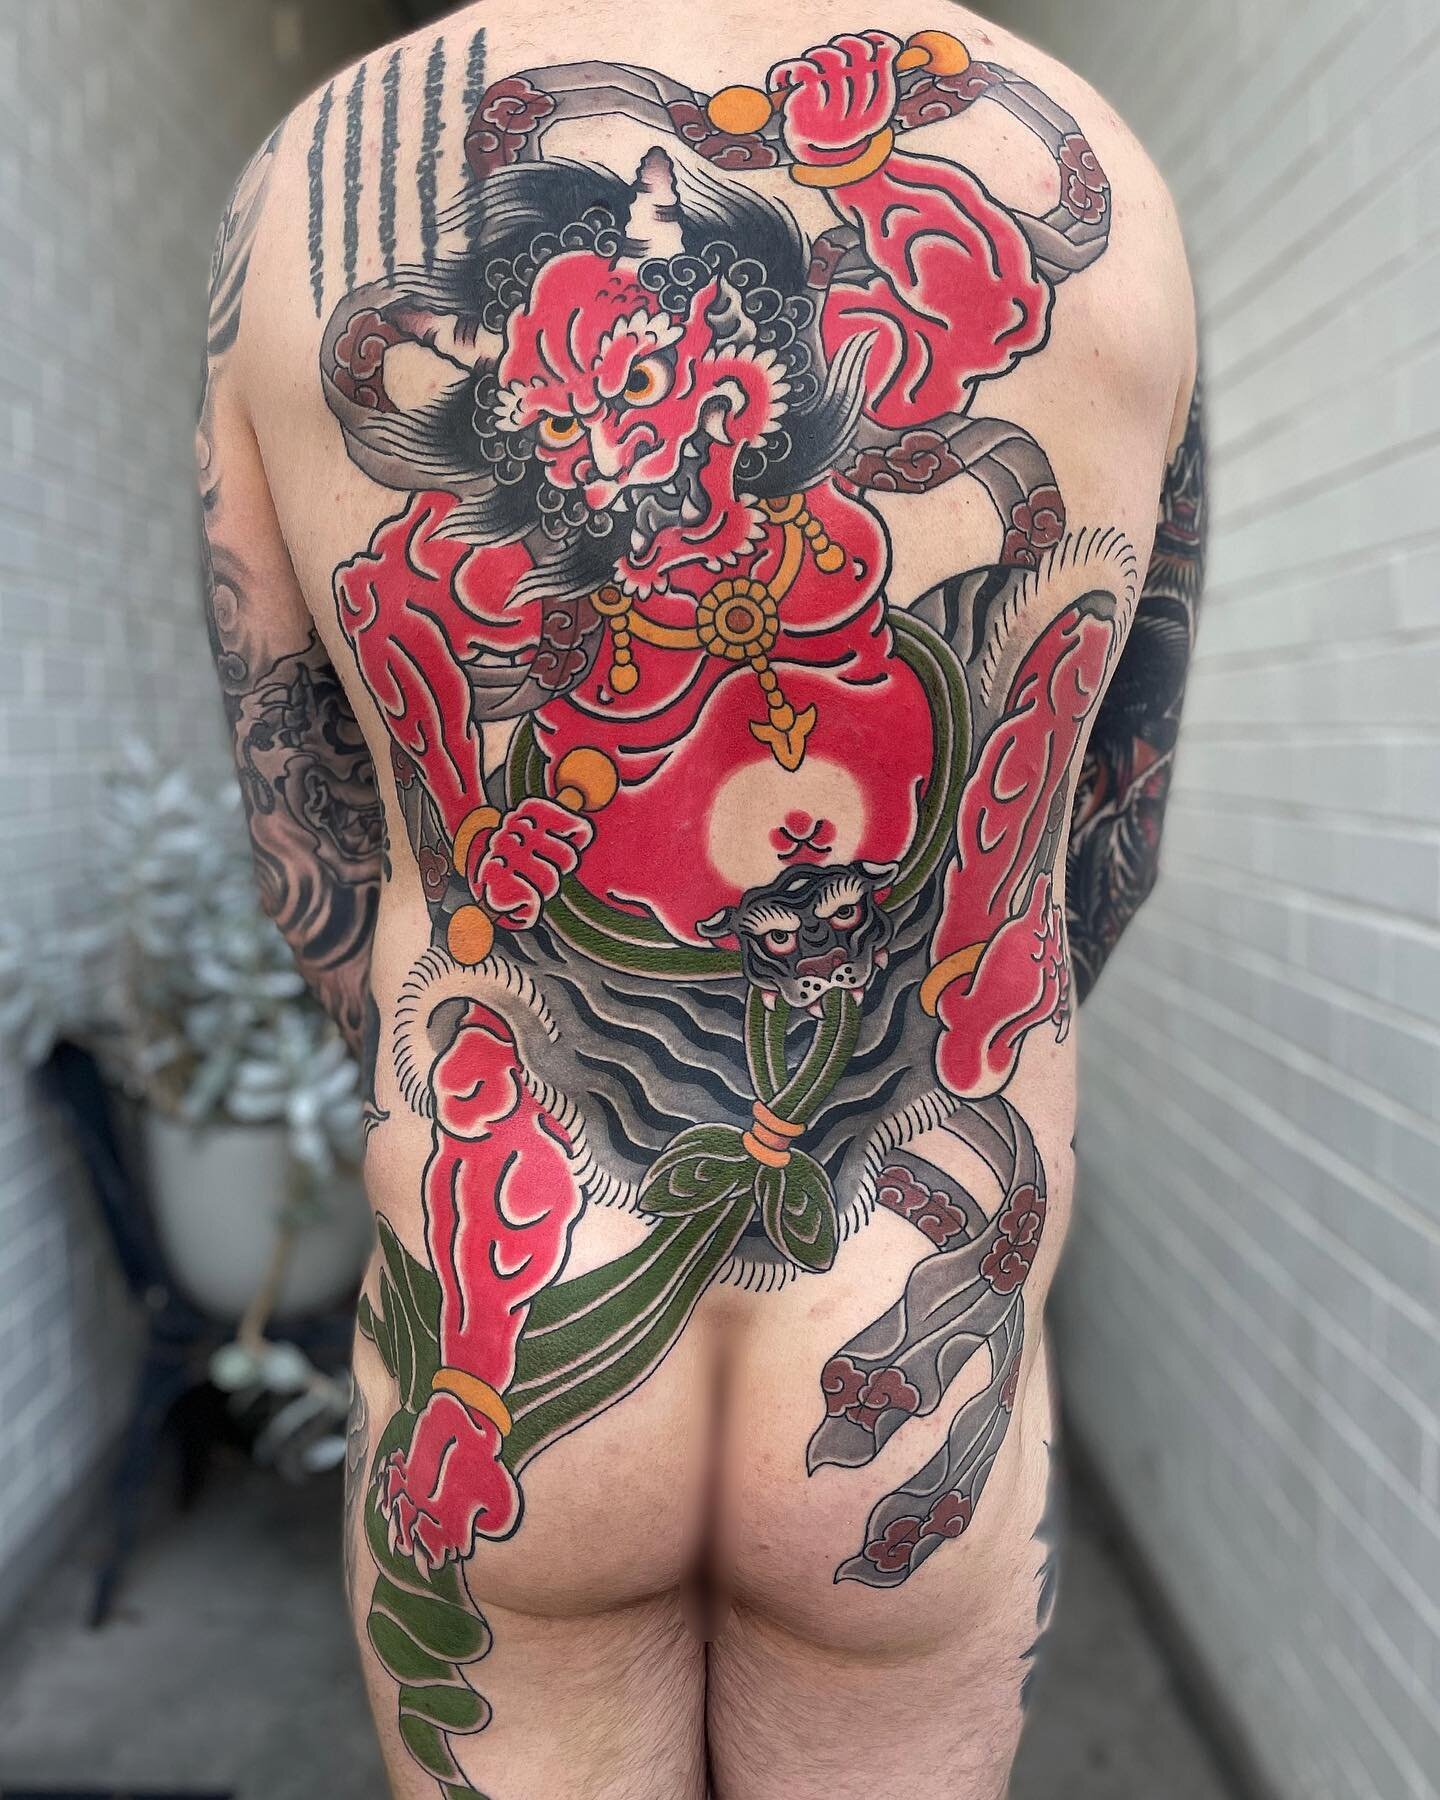 Phase 1 complete for @sdreezy on his Raijin backpiece. We knocked this out in 2 months, amazing effort on his behalf. Background to come next year